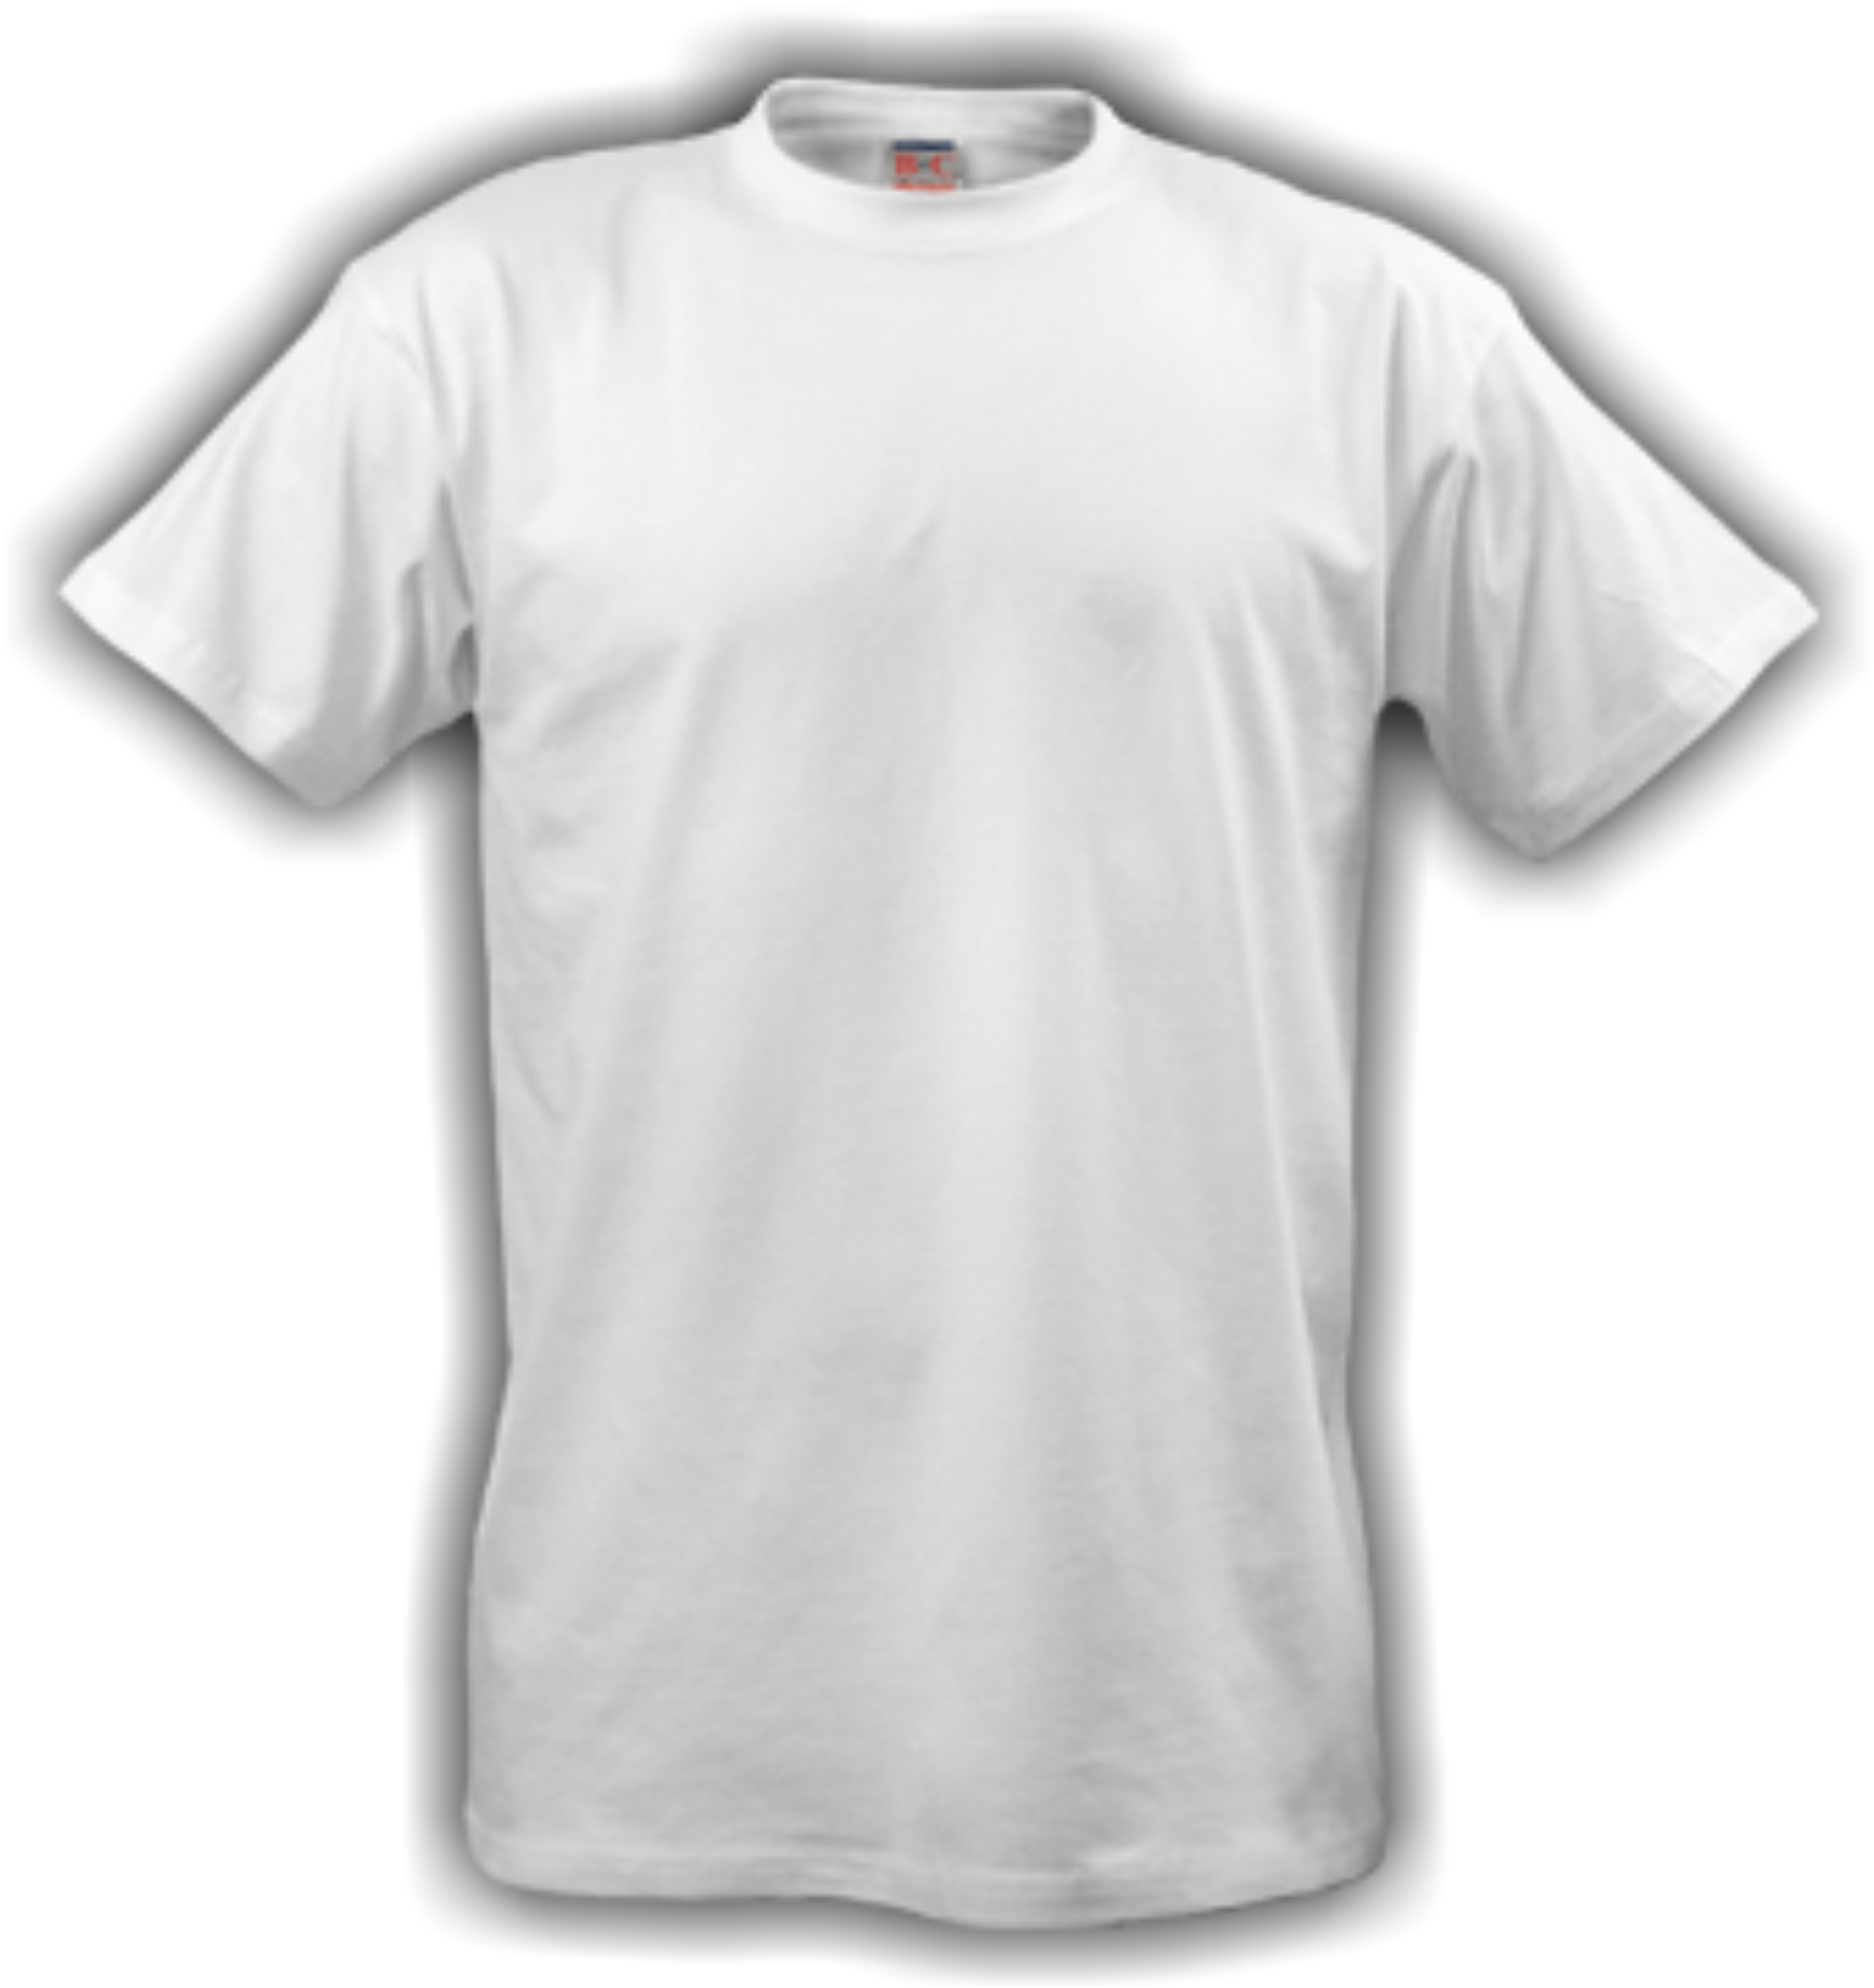 Free White T Shirt Template Png, Download Free White T Shirt Template